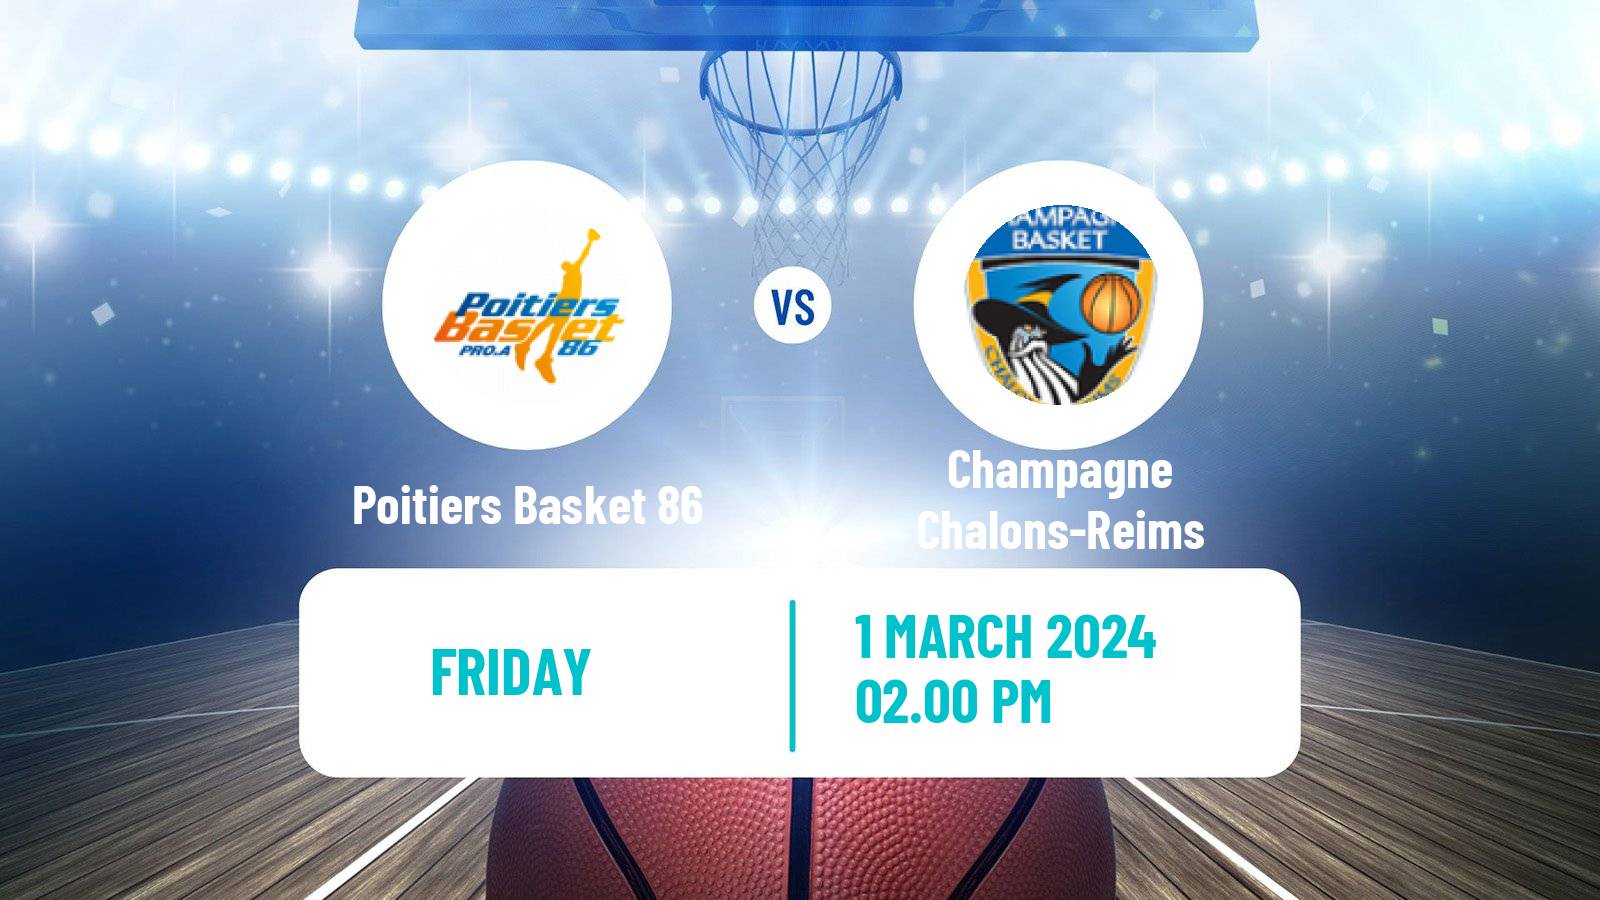 Basketball French LNB Pro B Poitiers Basket 86 - Champagne Chalons-Reims